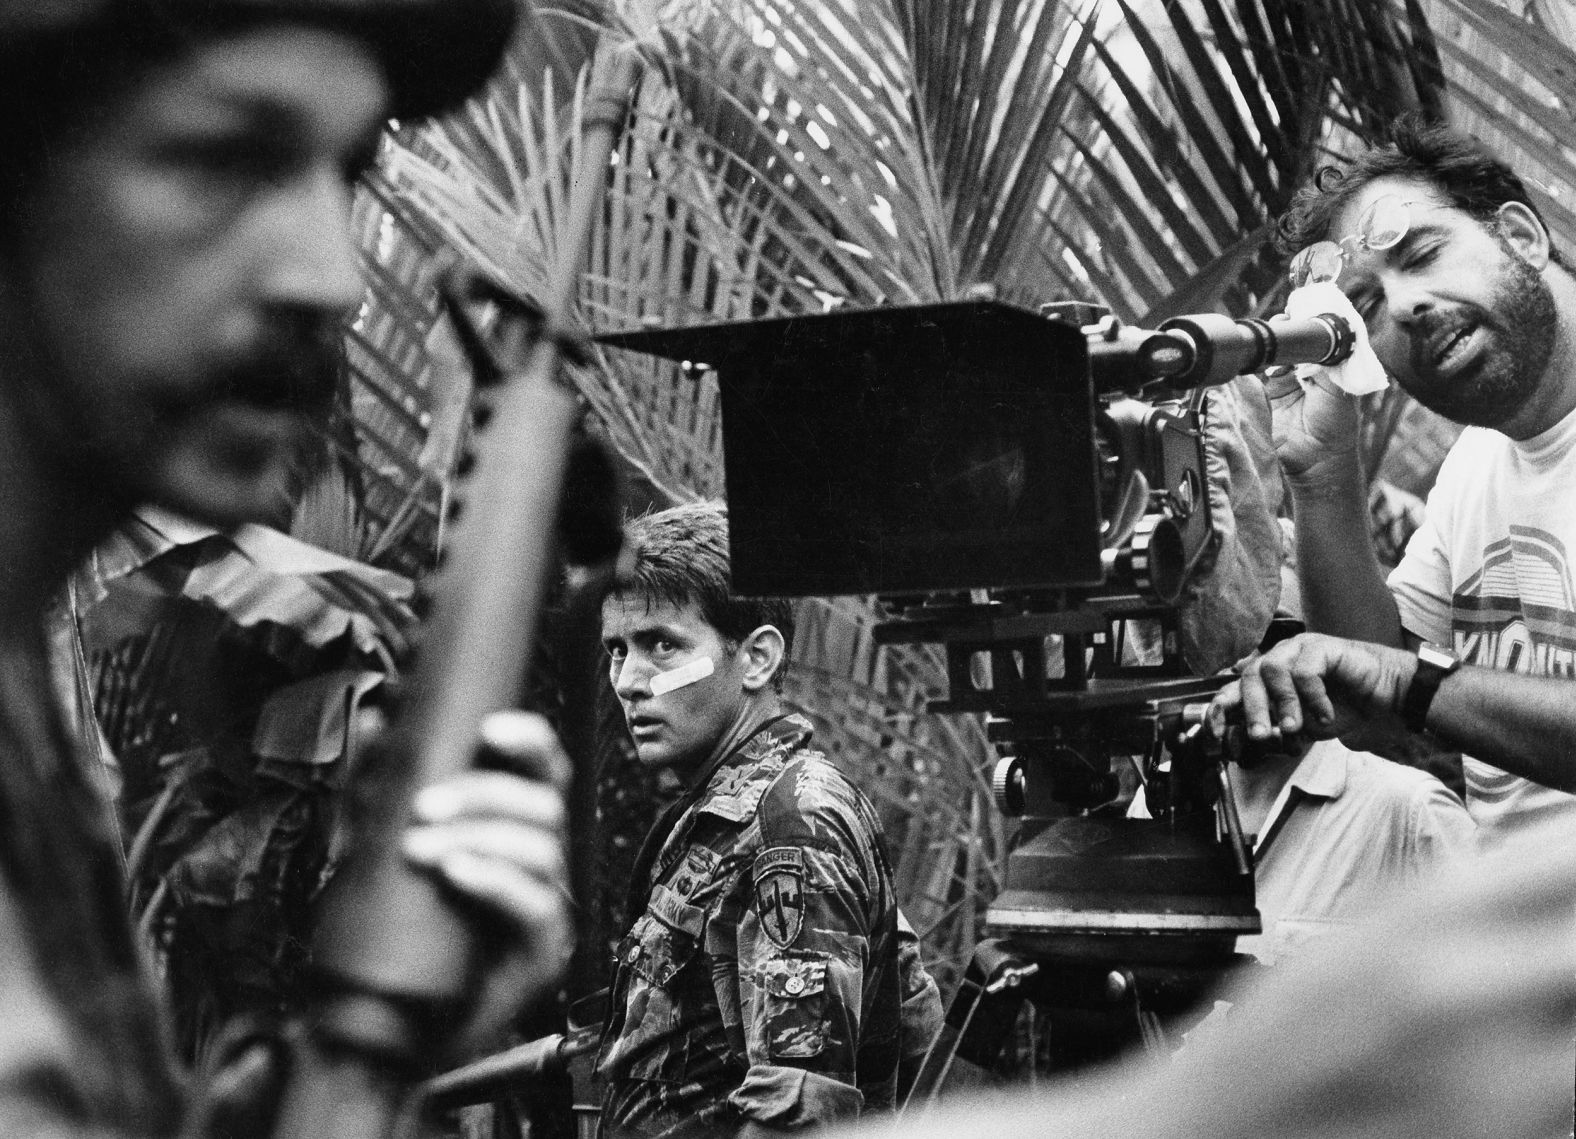 Actor Martin Sheen glances over his shoulder as director Francis Ford Coppola directs "Apocalypse Now" in 1979.